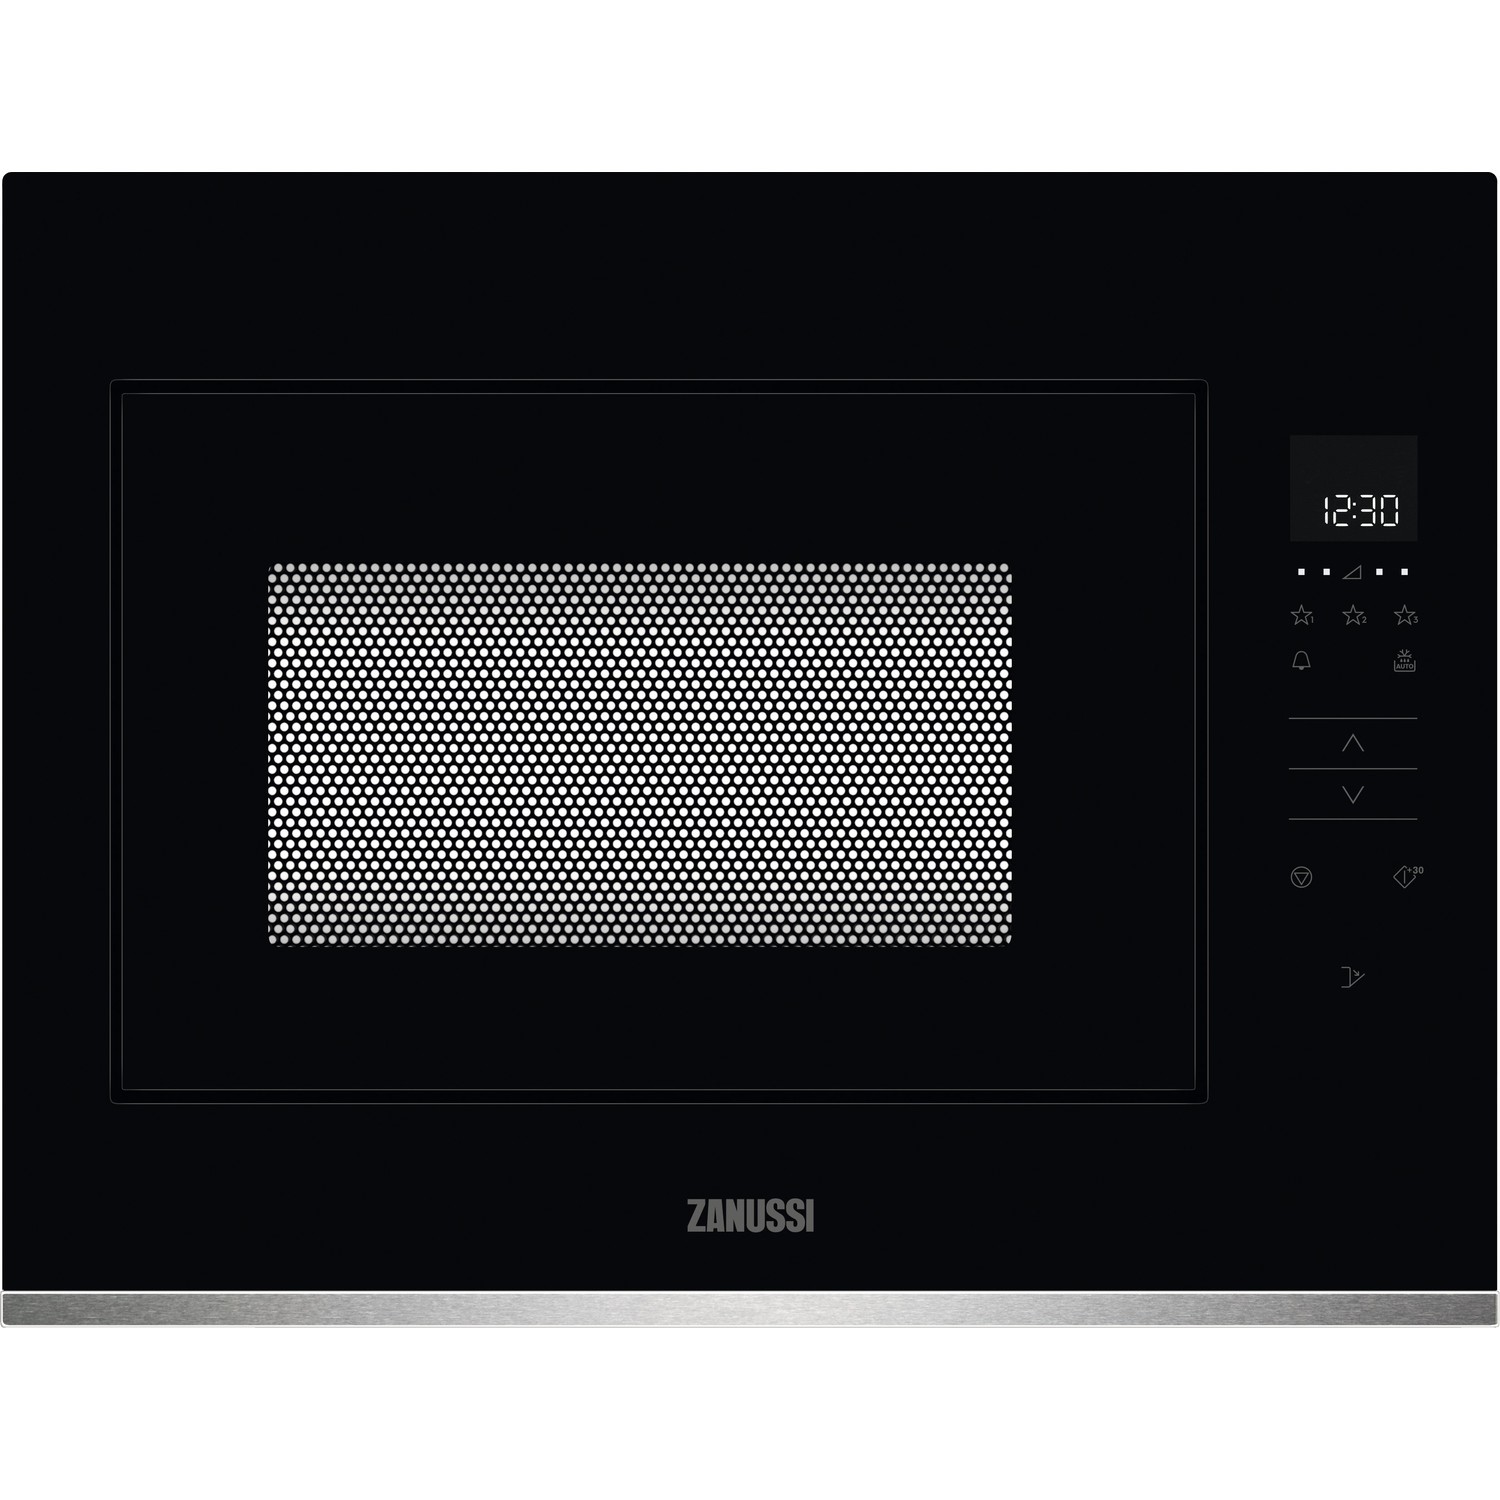 Zanussi Series 20 25L 900W Built-in Microwave - Black with Stainless Steel Trim